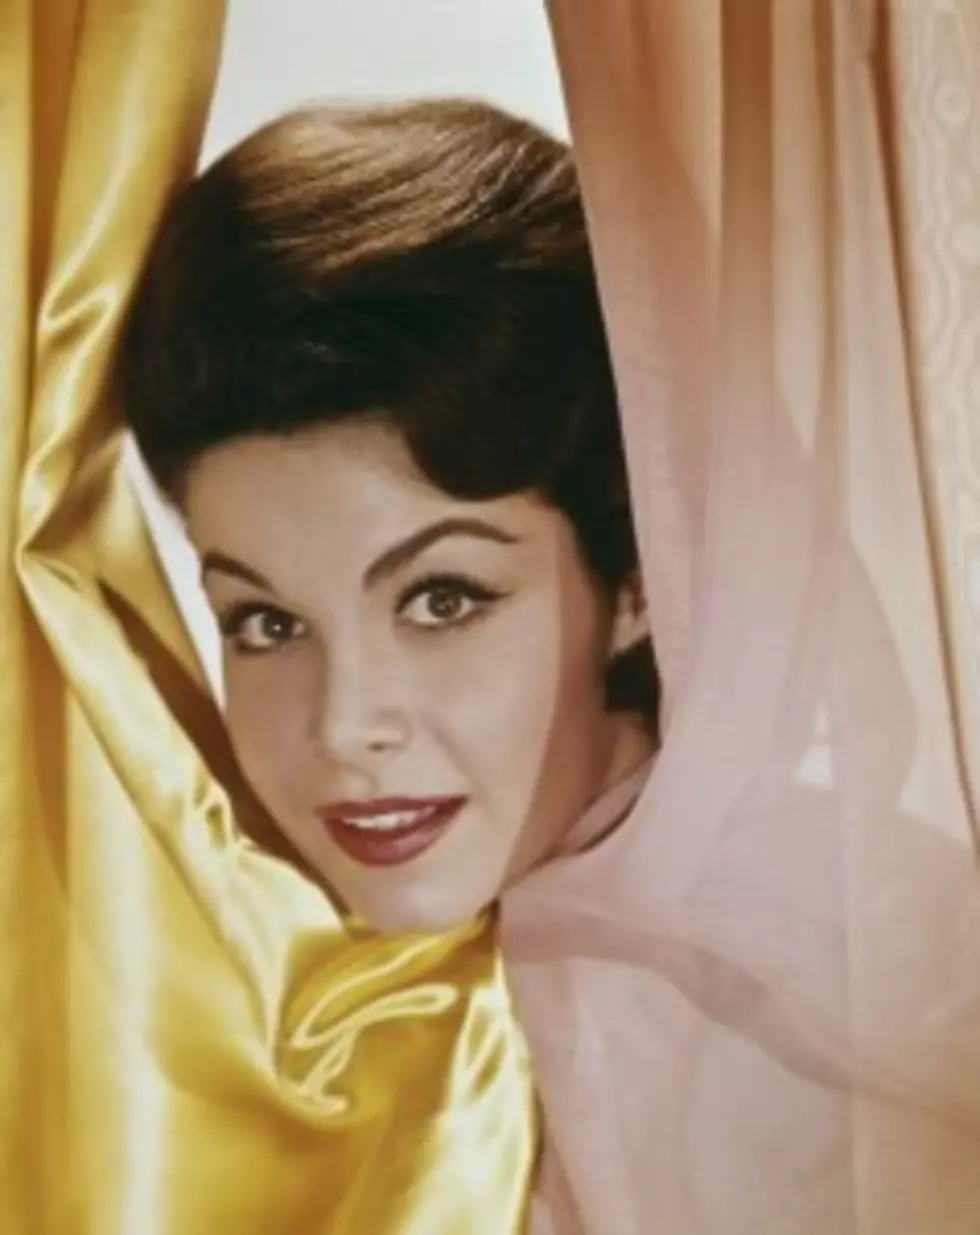 Former Mousketeer, Disney Icon, Annette Funicello Dead at 70